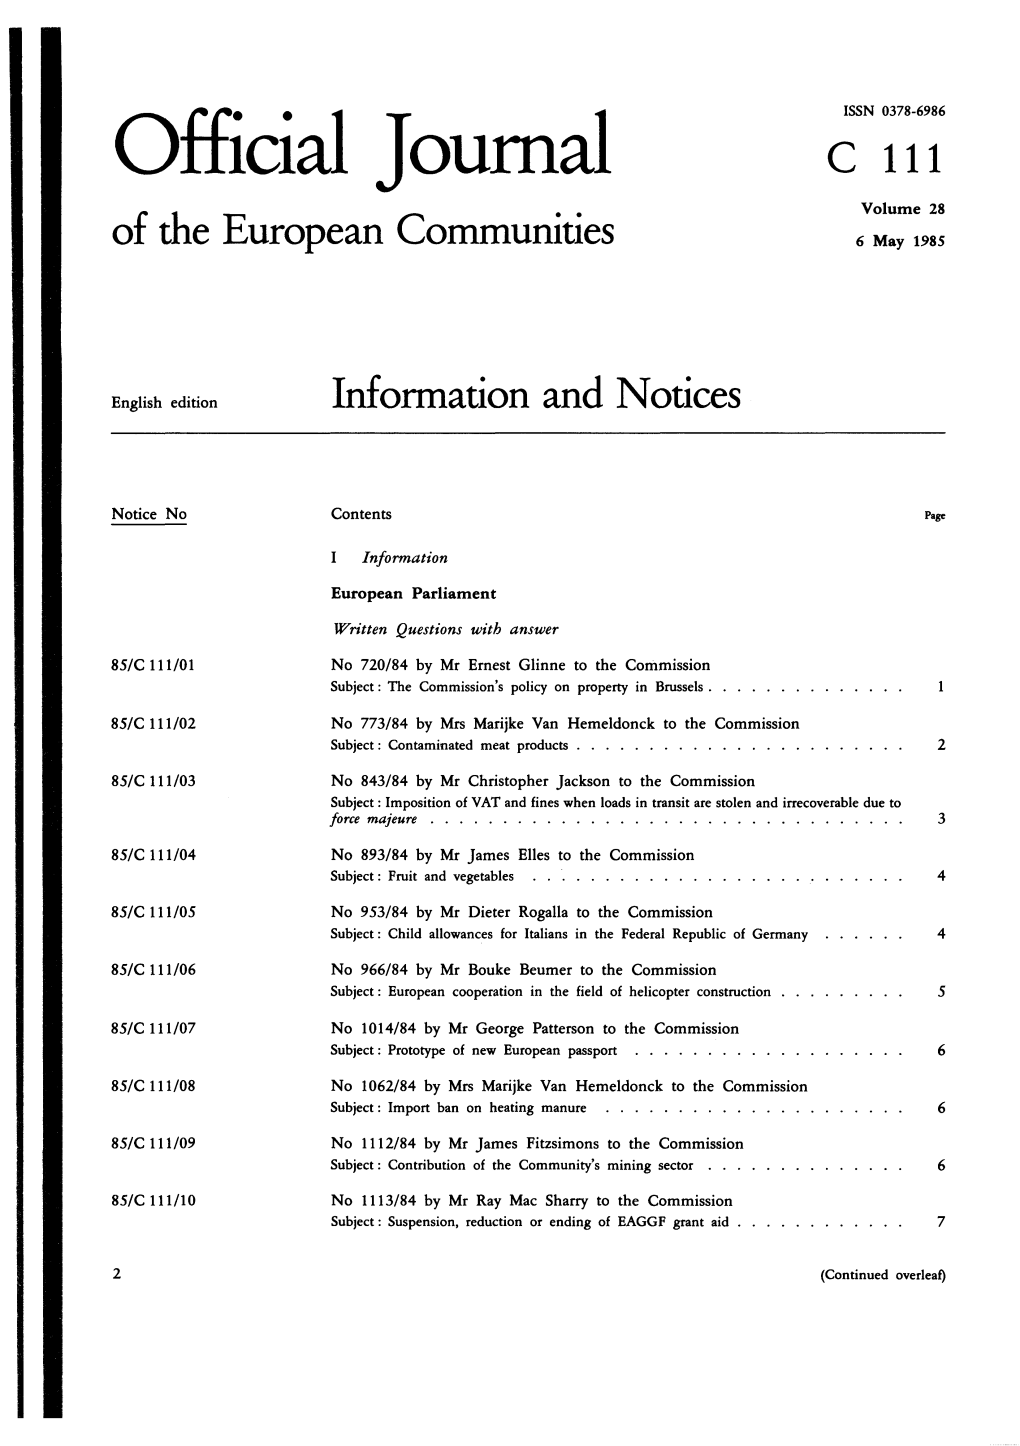 Official Journal C 111 Volume 28 of the European Communities 6 May 1985